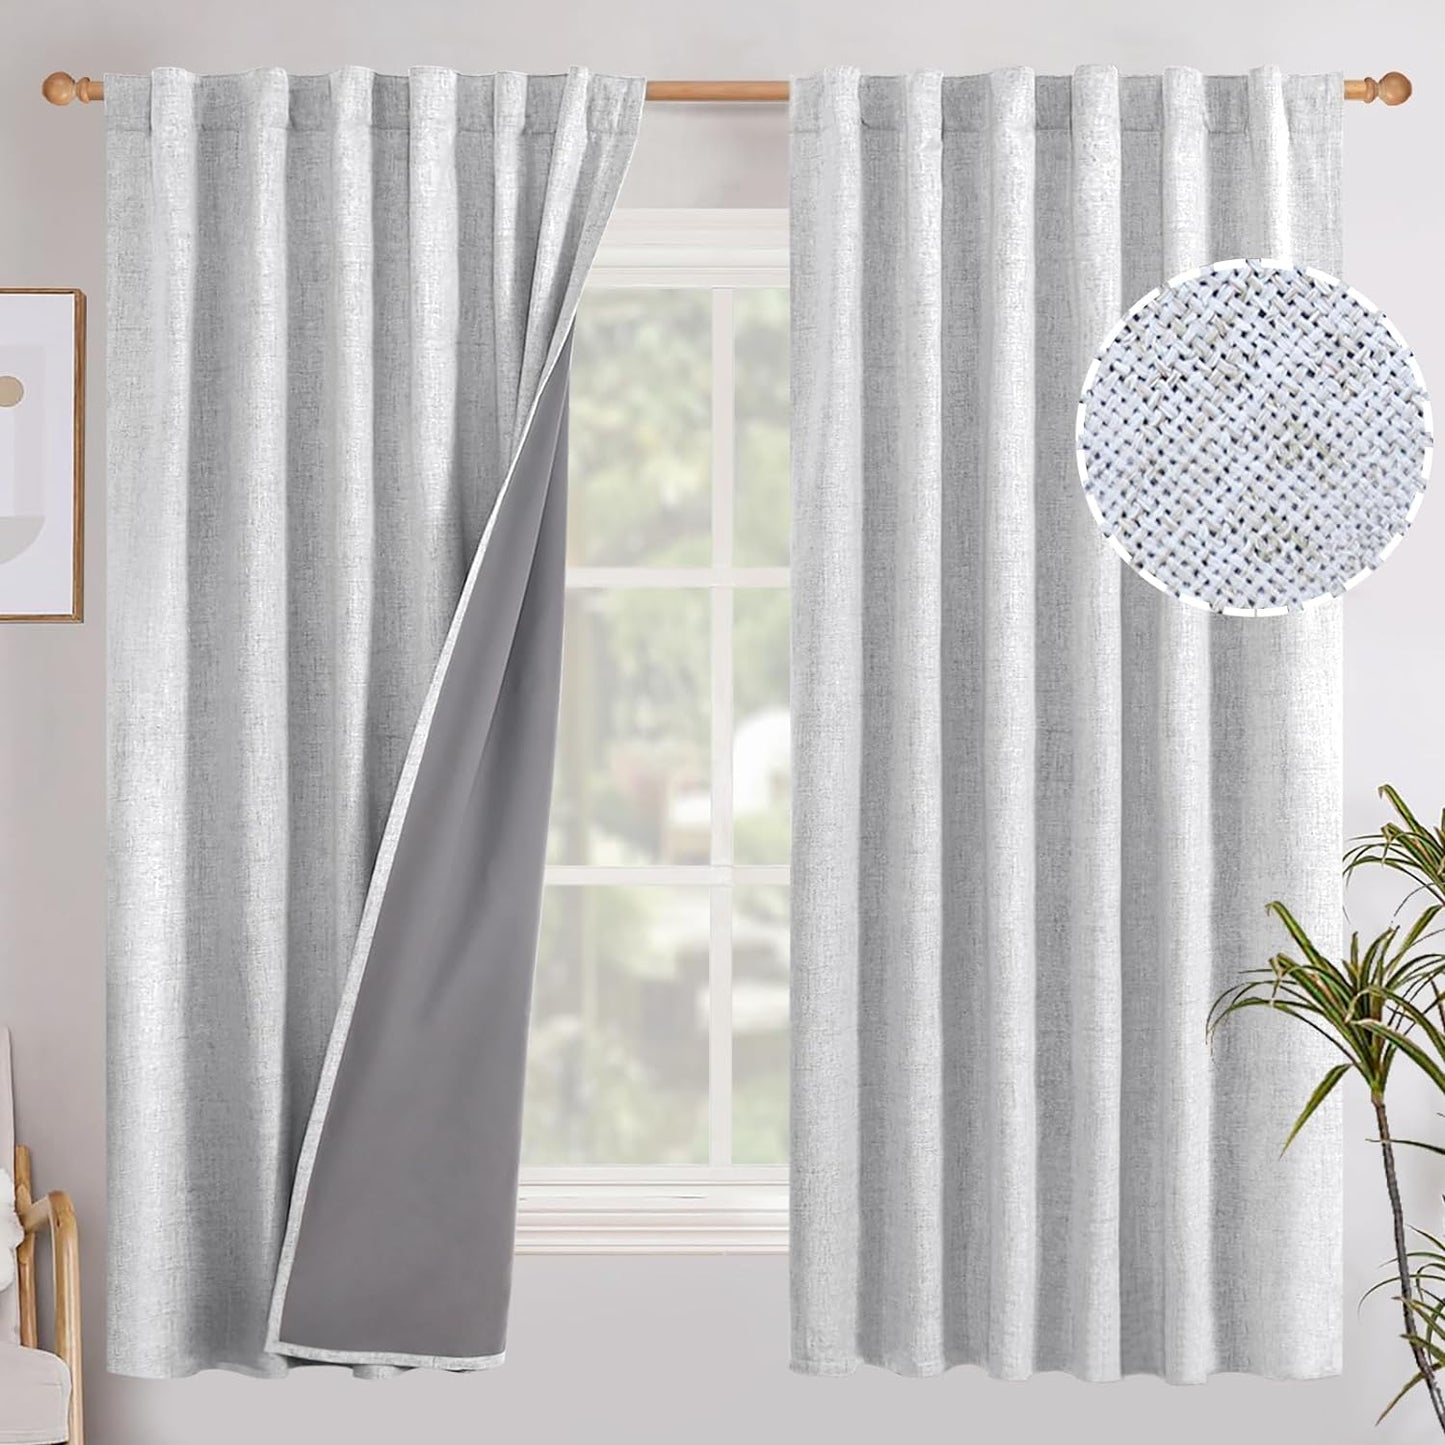 Youngstex Linen Blackout Curtains 63 Inch Length, Grommet Darkening Bedroom Curtains Burlap Linen Window Drapes Thermal Insulated for Basement Summer Heat, 2 Panels, 52 X 63 Inch, Beige  YoungsTex Back Tab/Linen 52W X 63L 